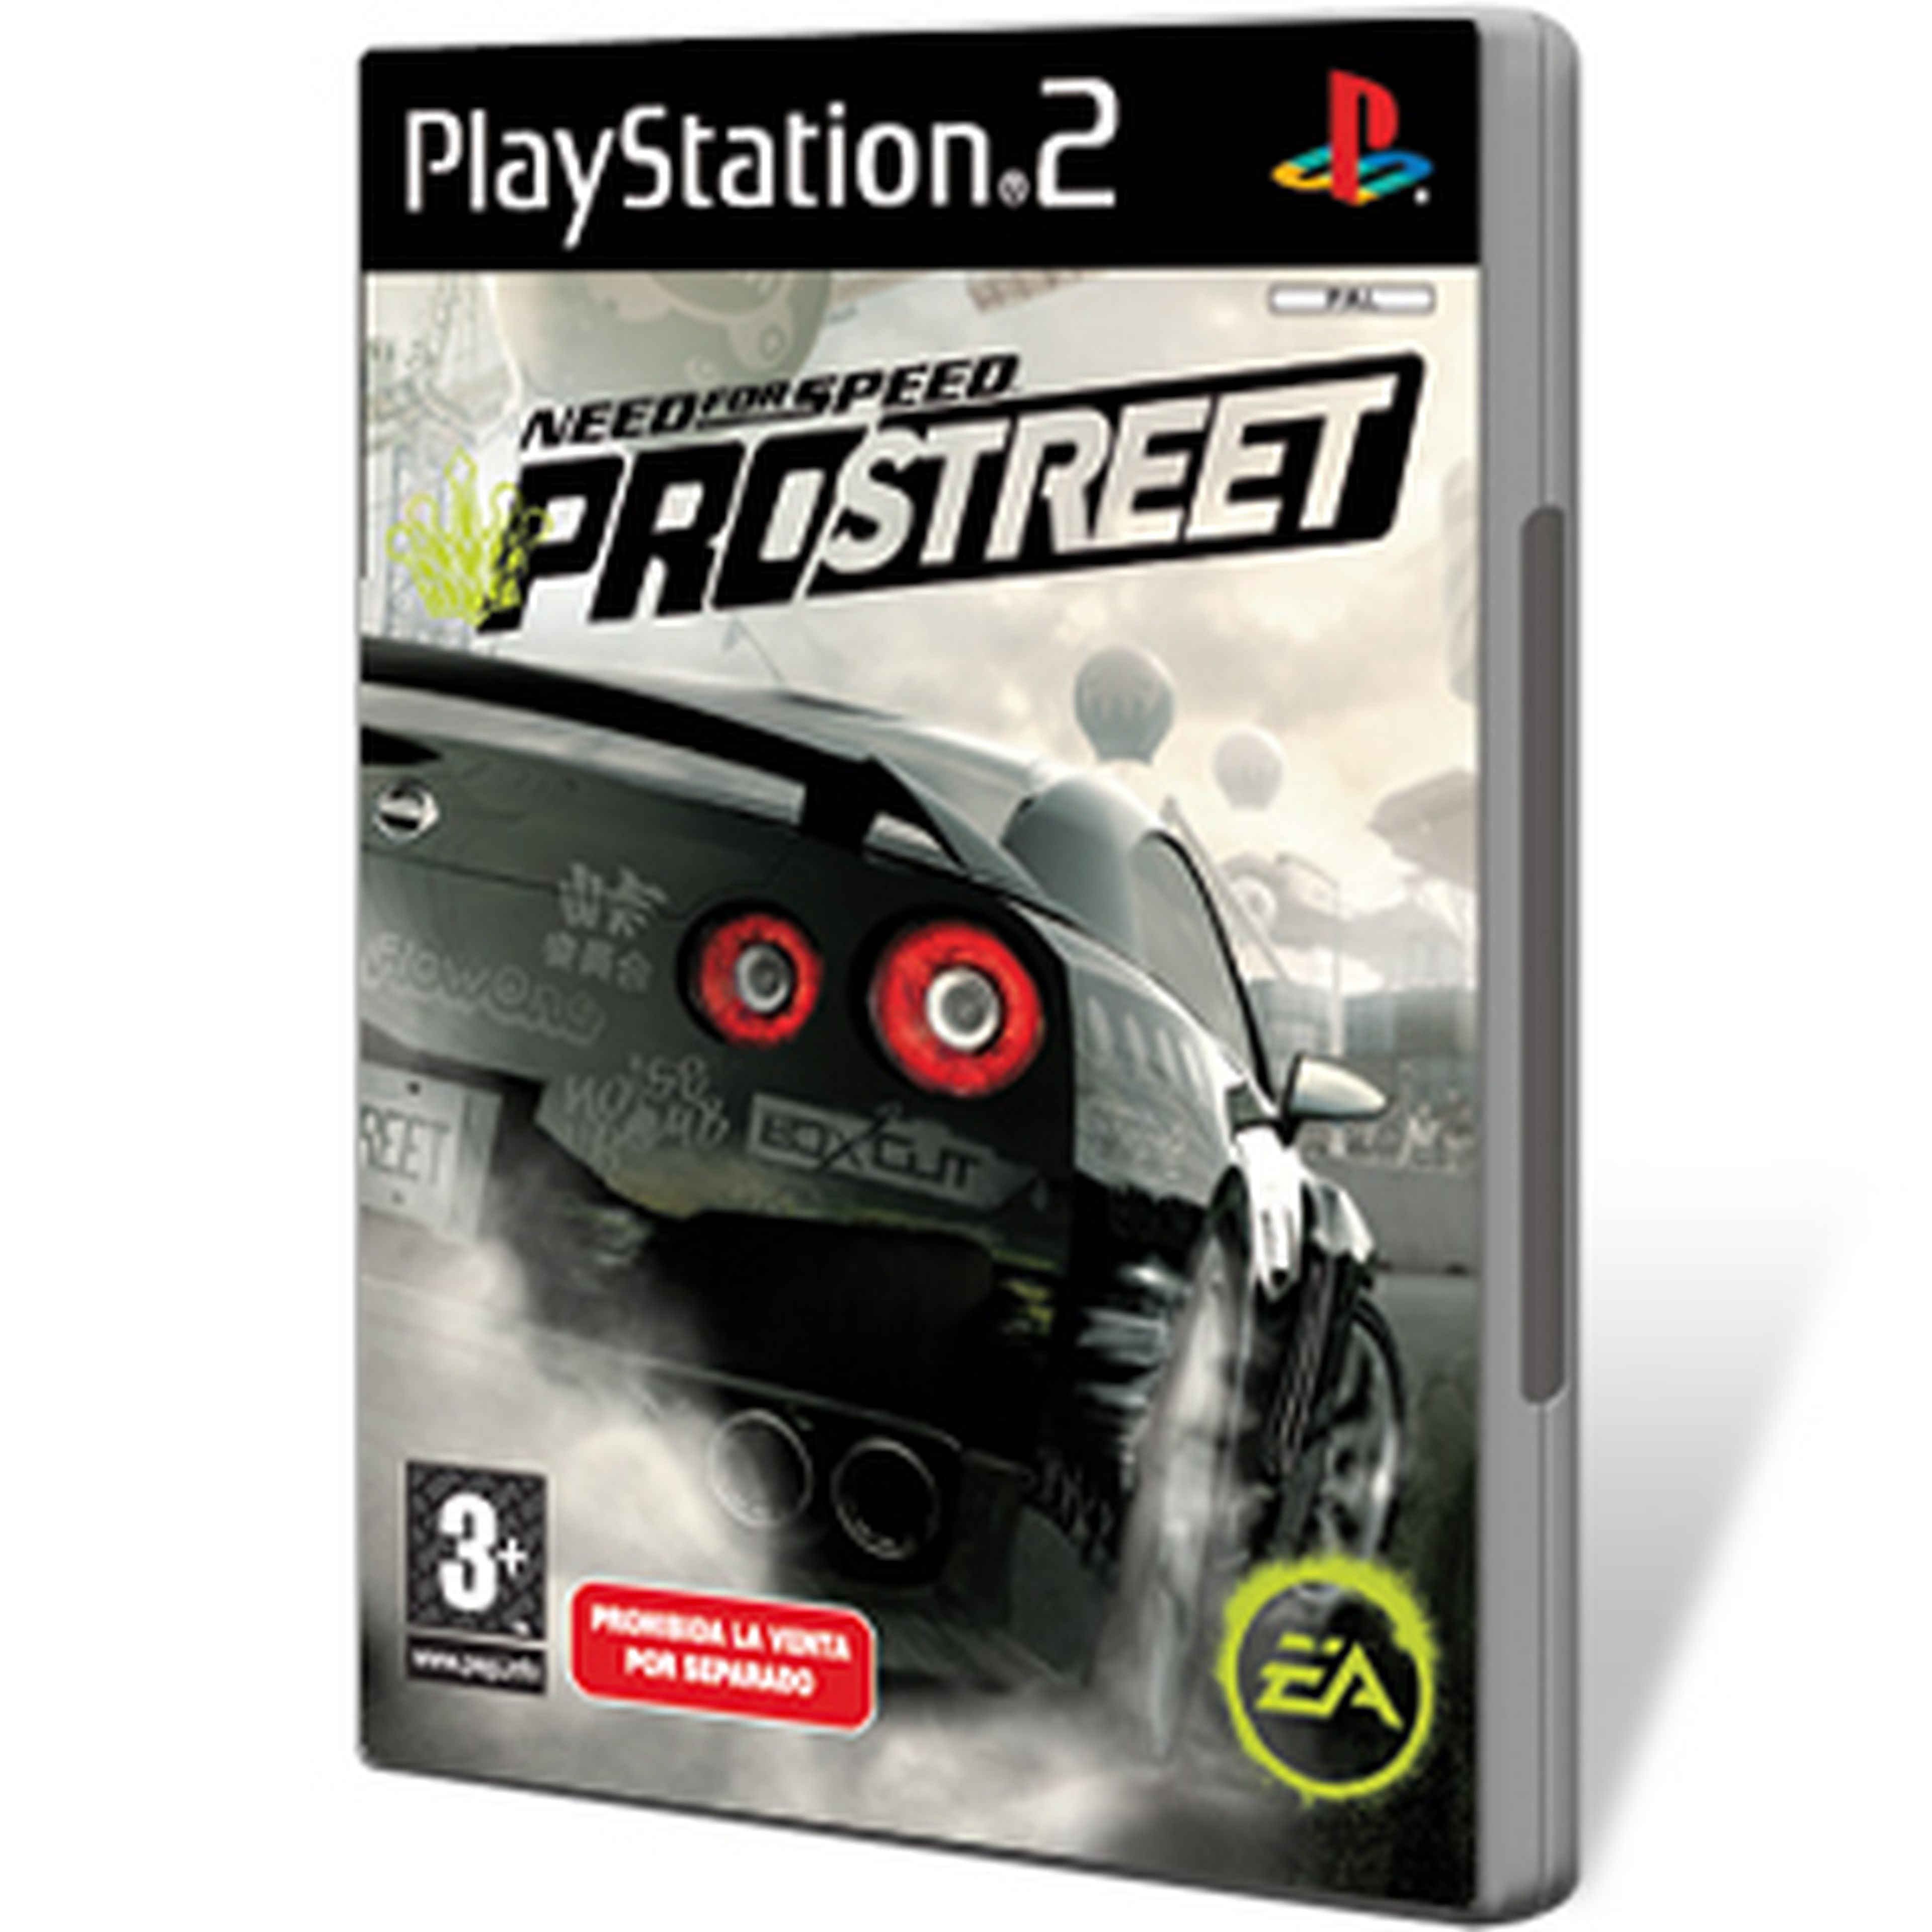 Need for Speed Prostreet para PS2